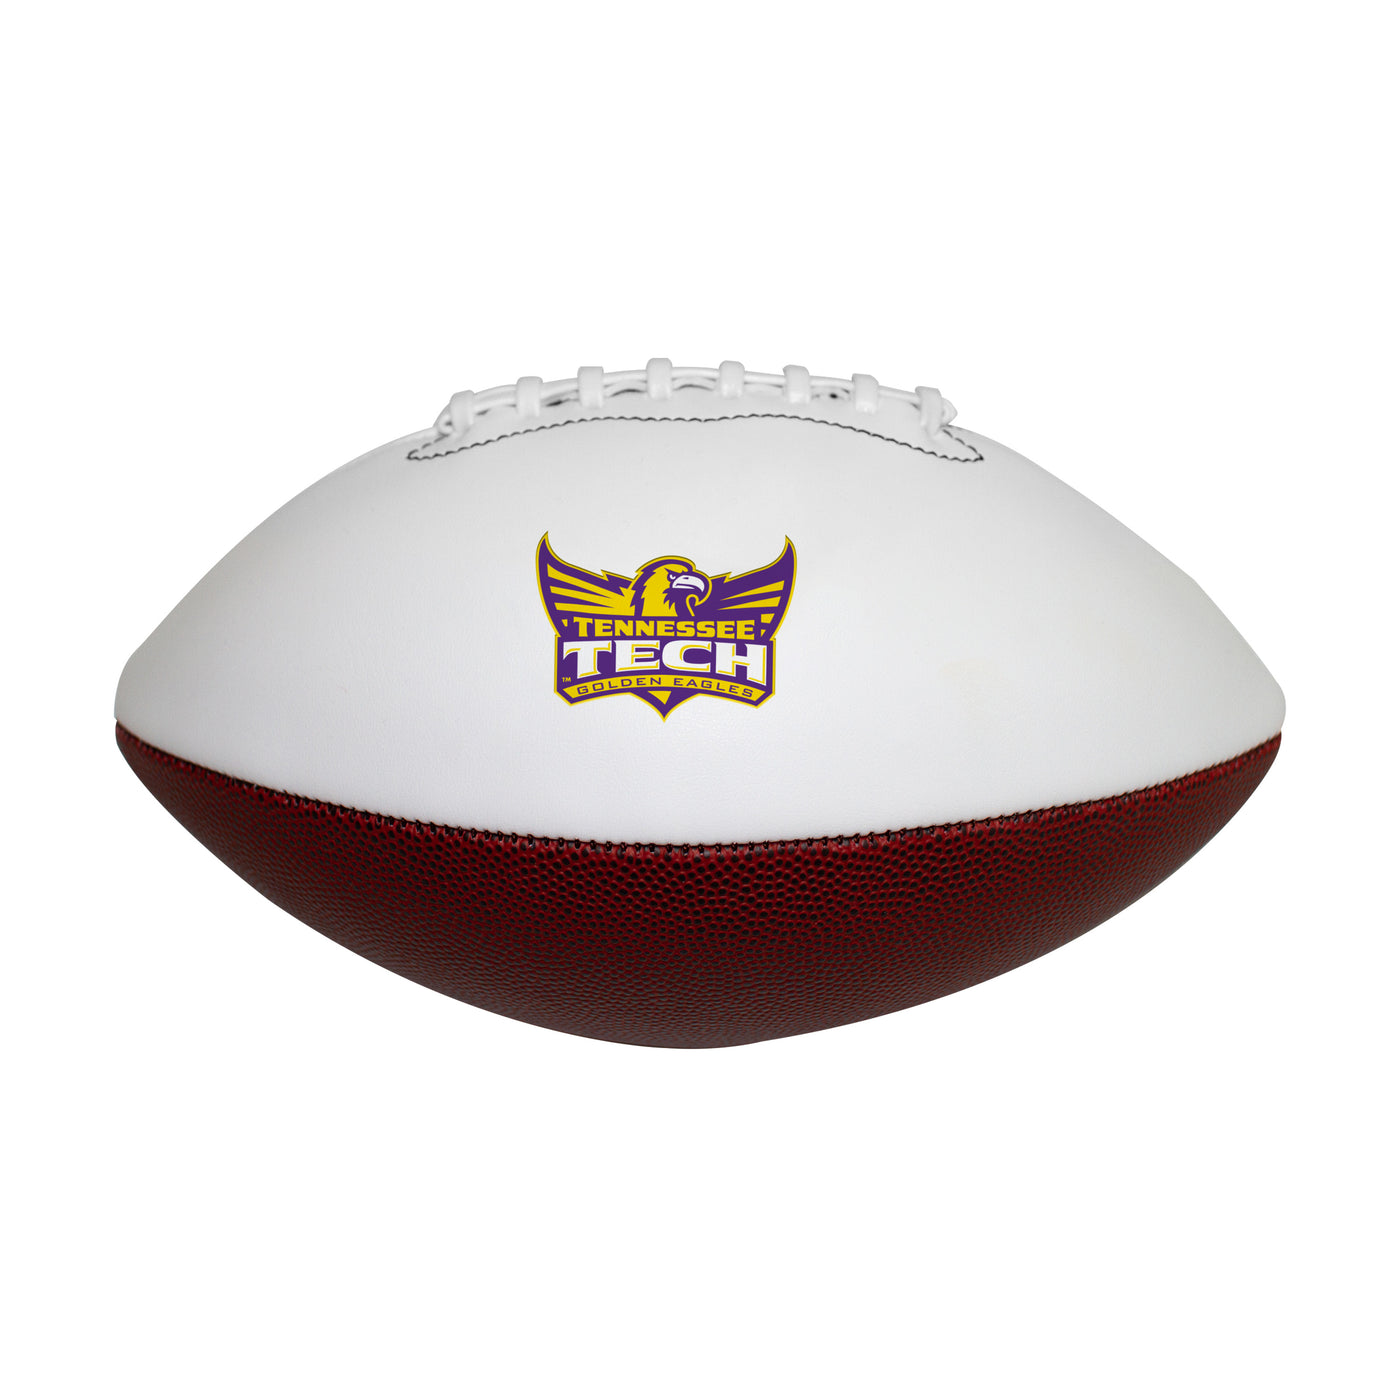 Tennessee Tech Official Size Autograph Football